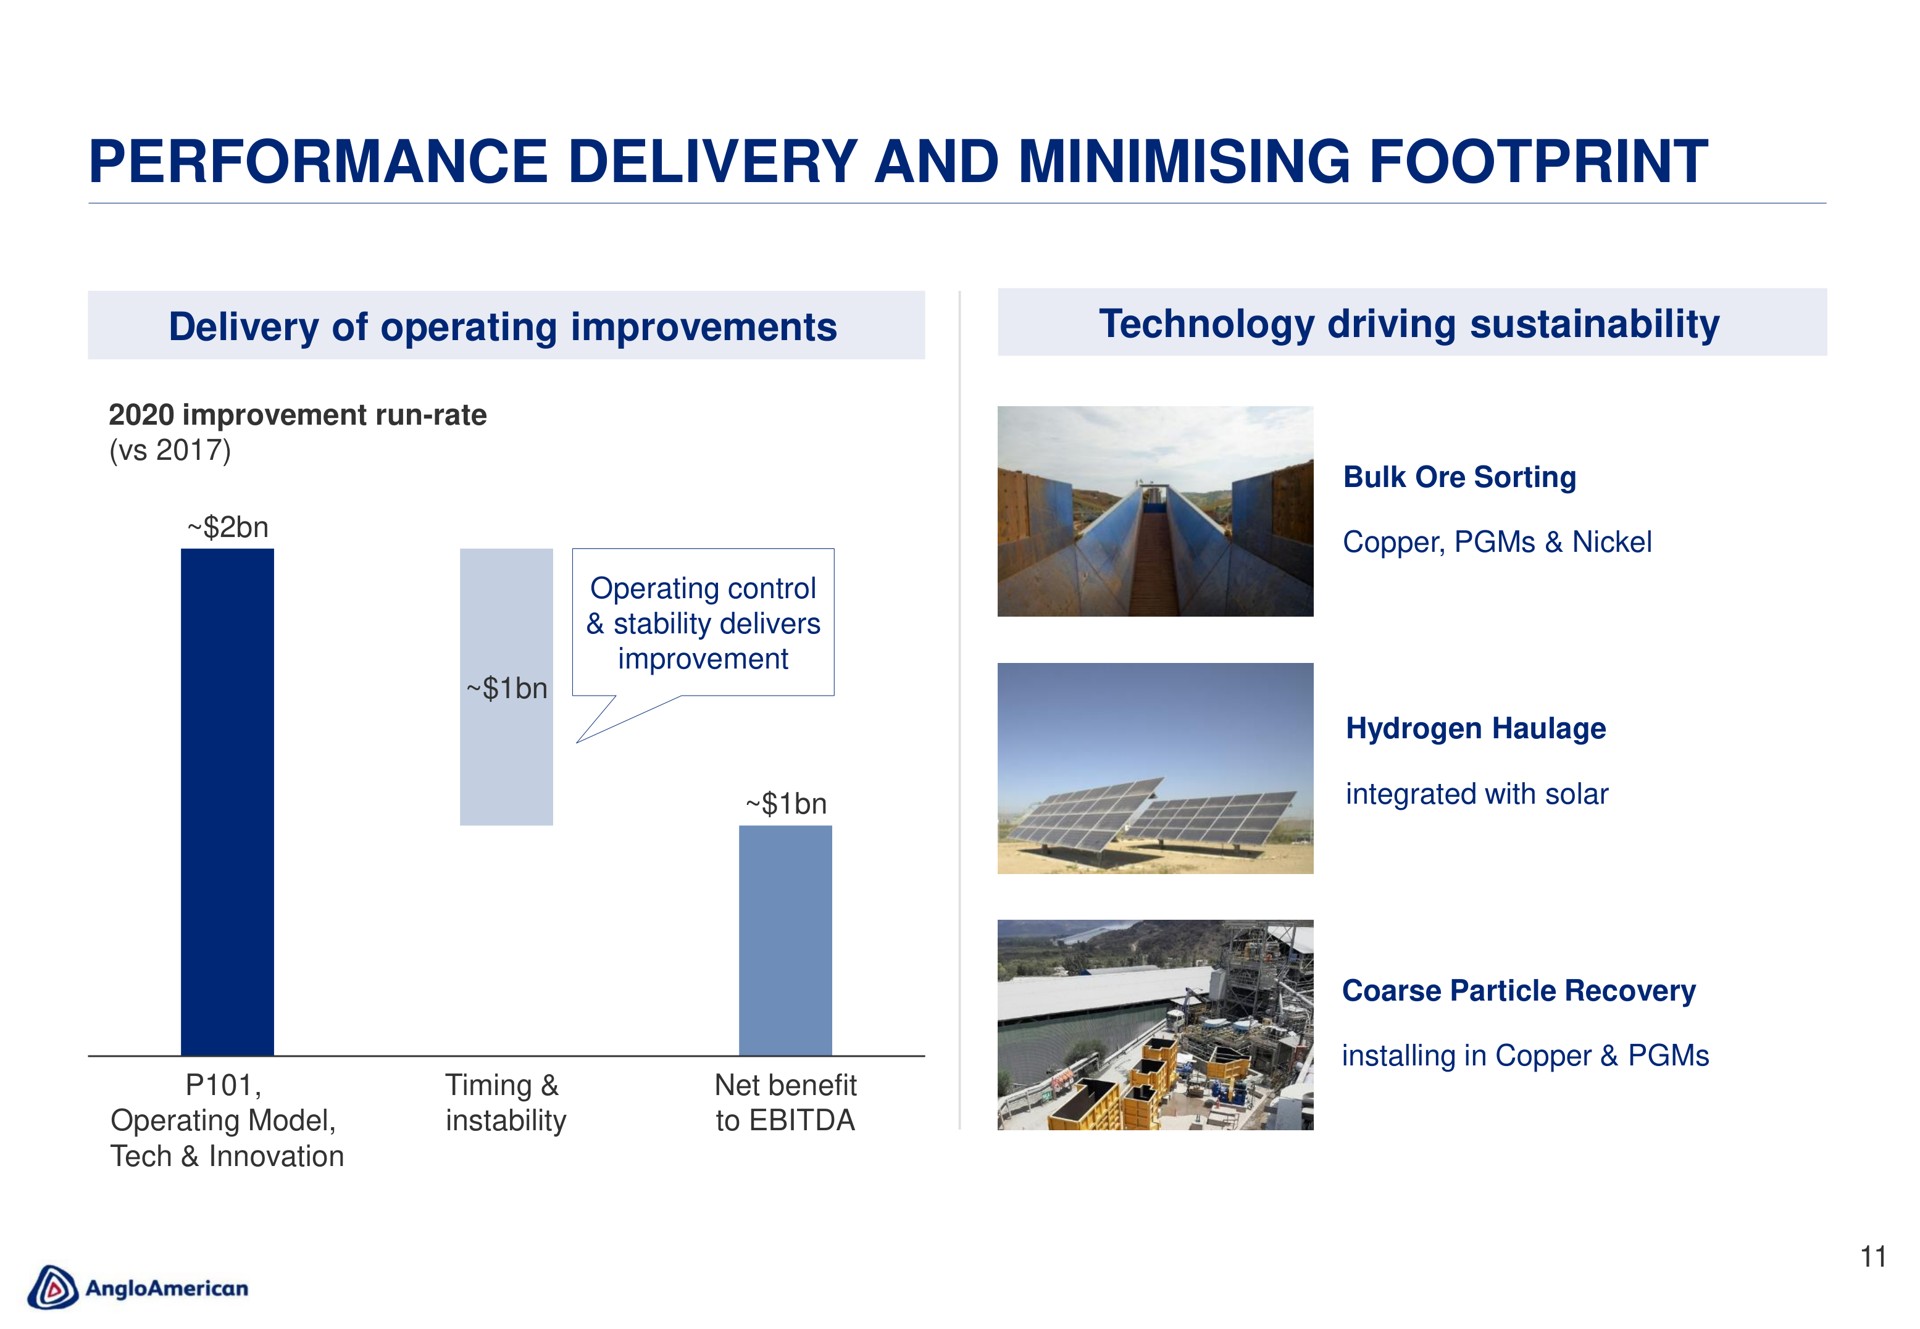 performance delivery and footprint | AngloAmerican